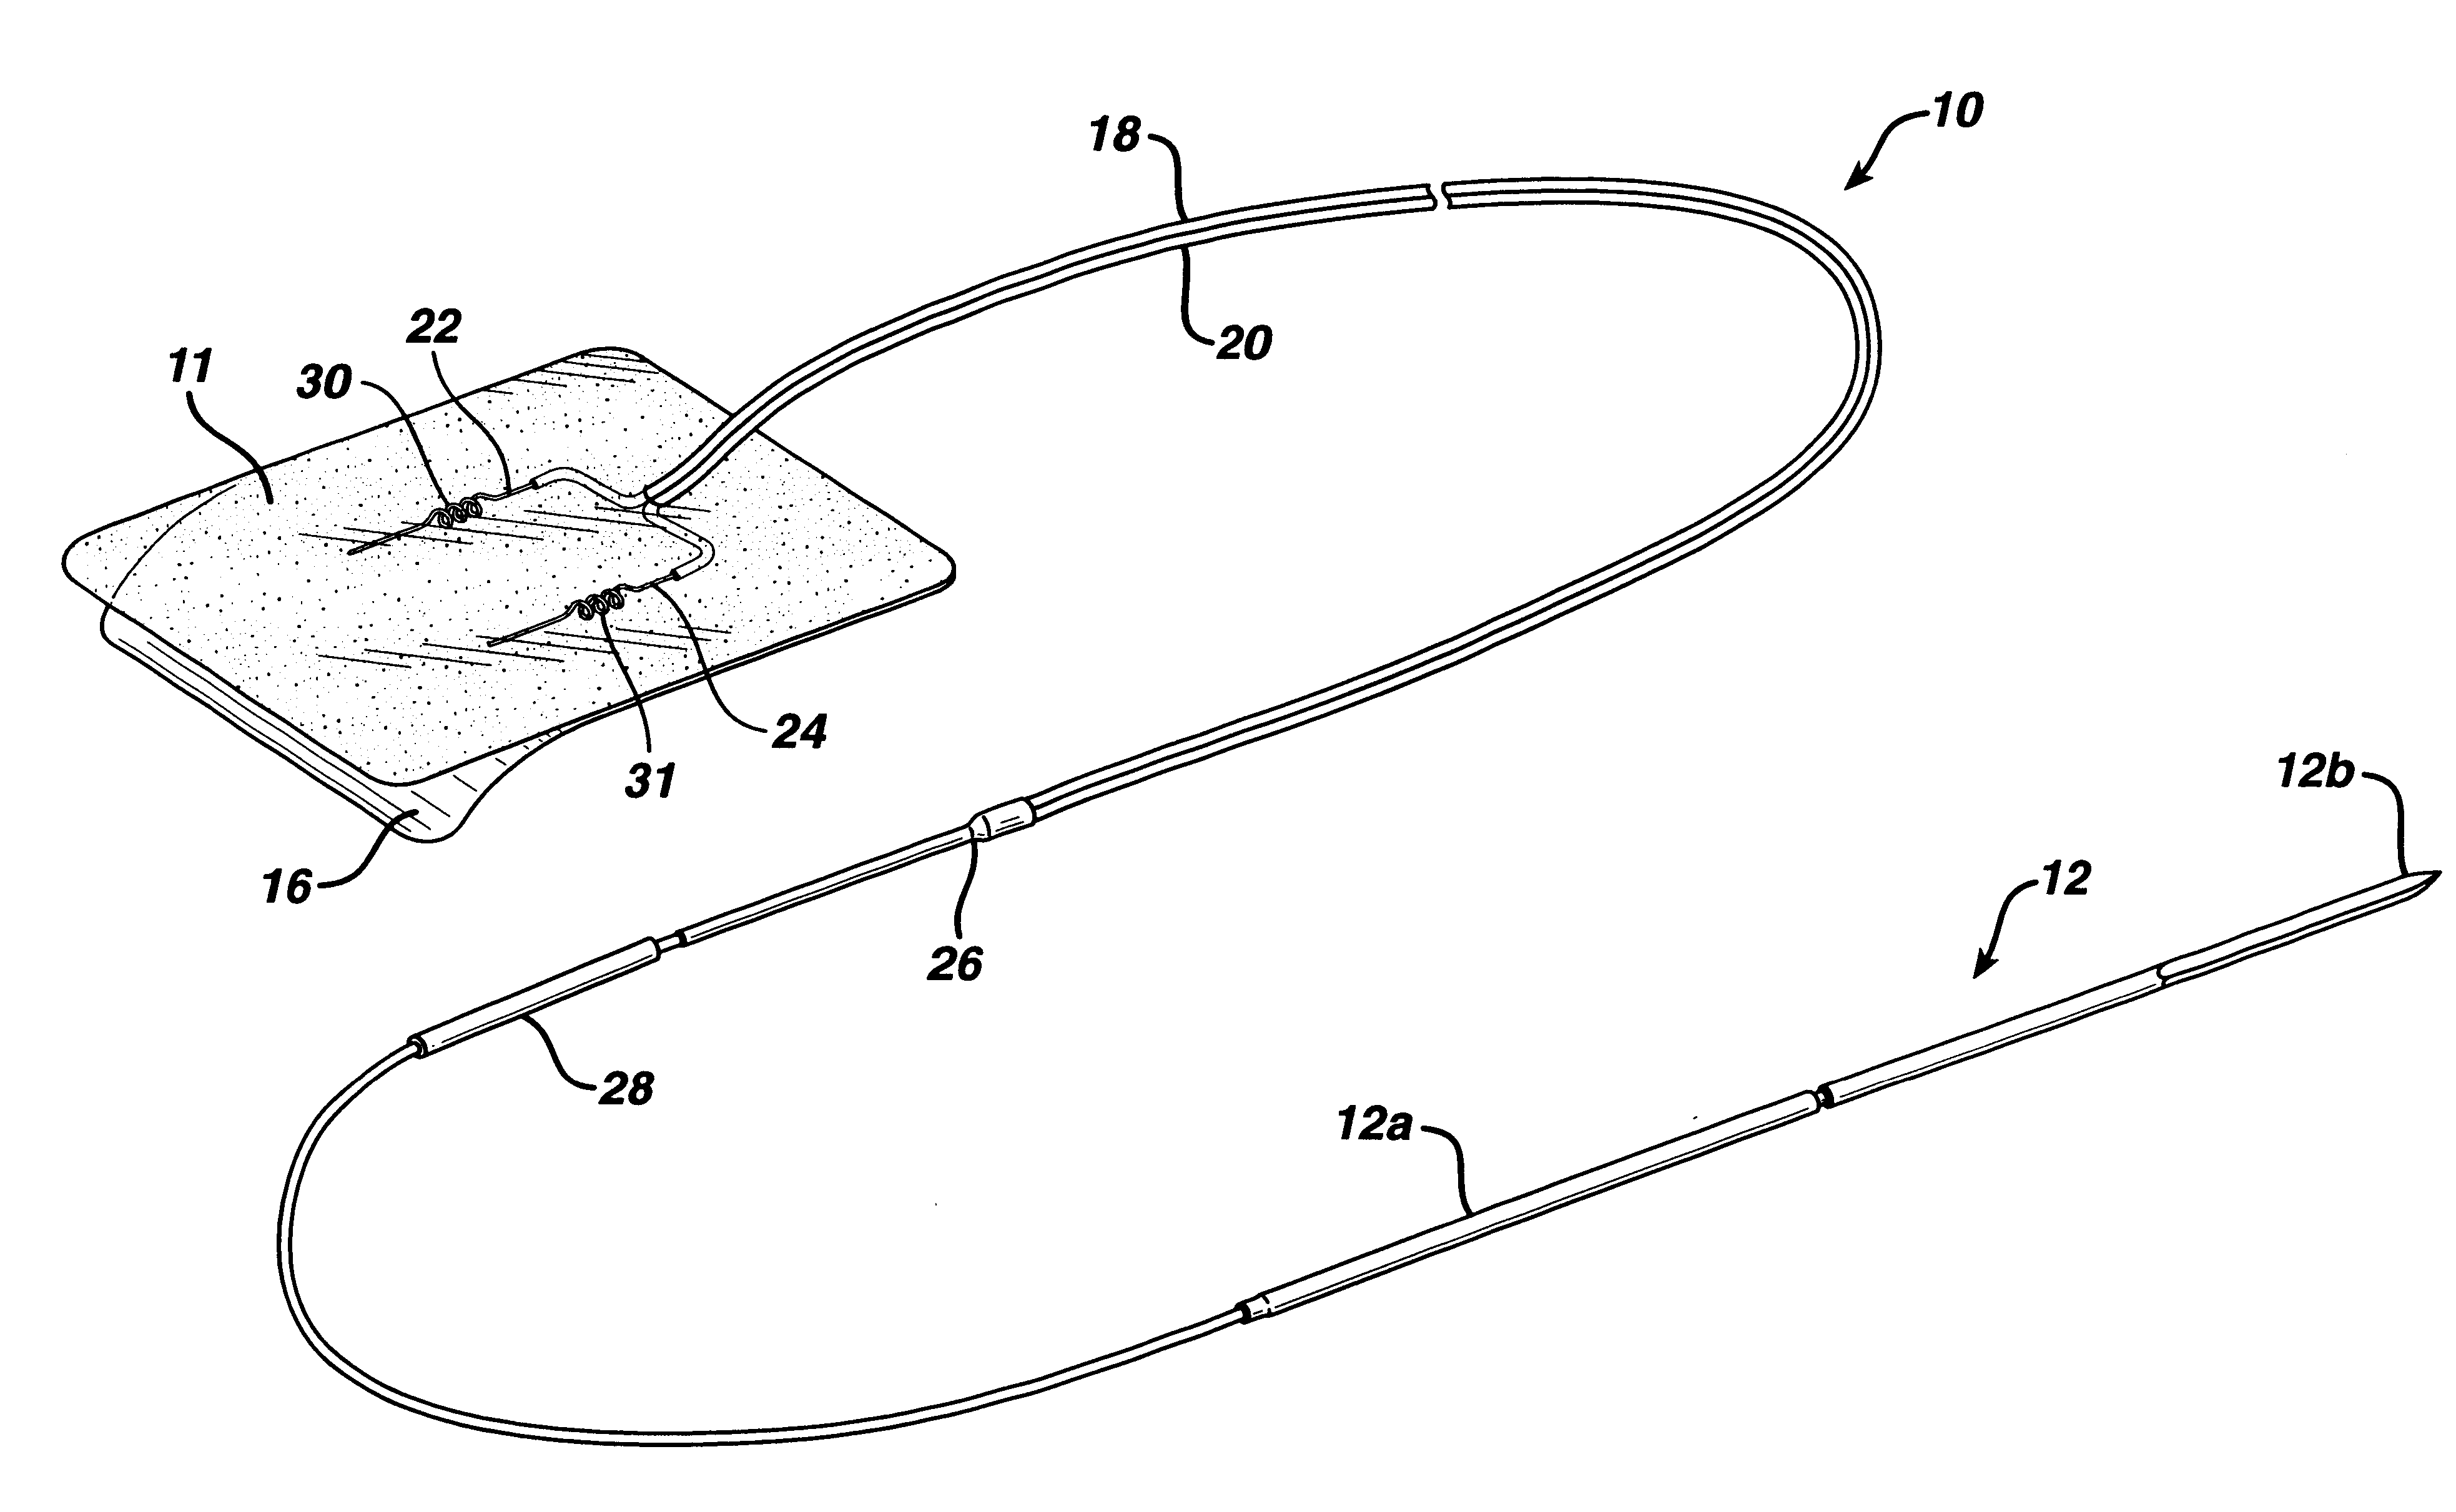 Electrical connector for cardiac devices